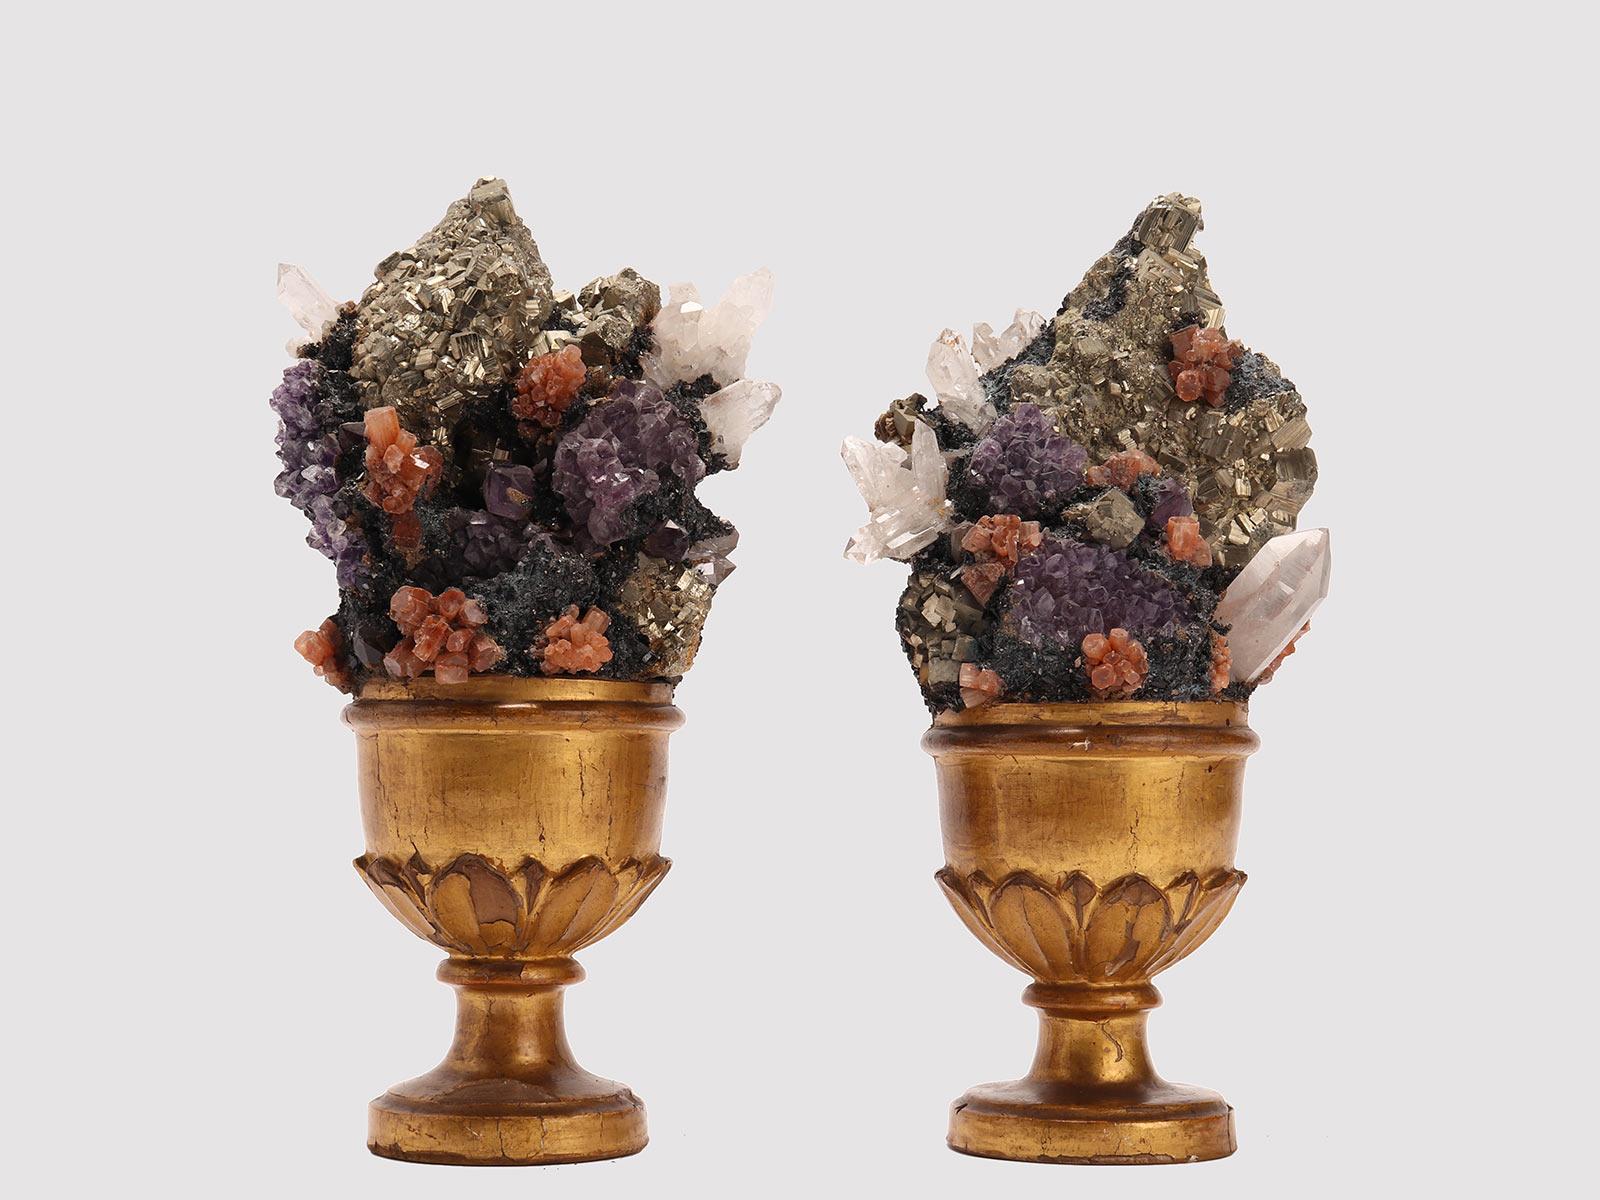 A Pair of Naturalia mineral specimen: a pair of rock crystals amethyst, aragonite and pyrite druzes, mounted over a guild-plated wooden bases on a vase shape with leaves. Italy around 1880.